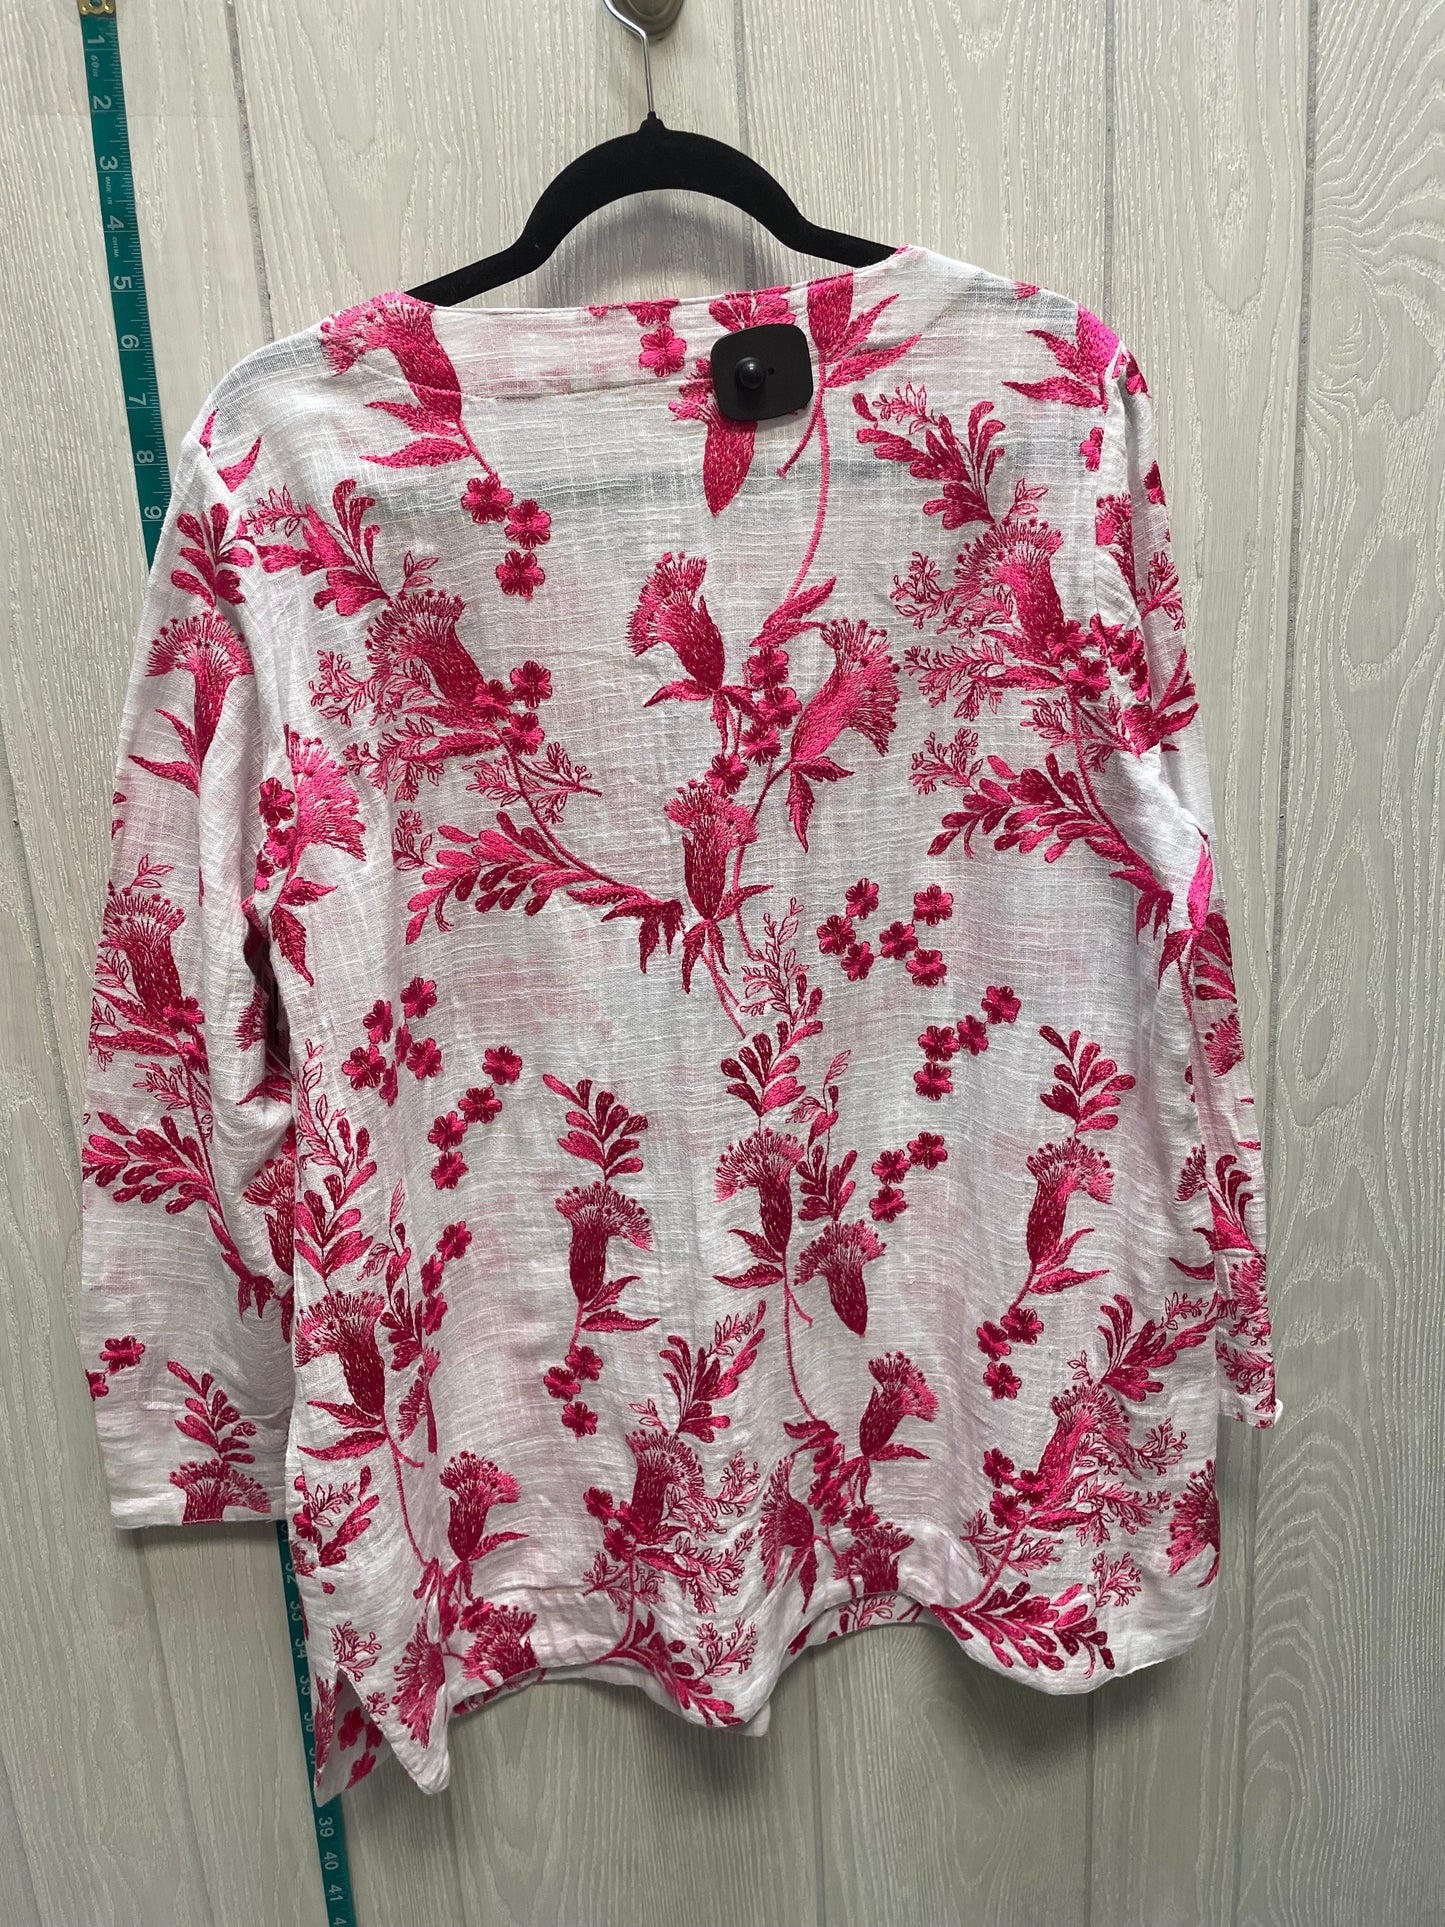 Pink & White Top Long Sleeve Soft Surroundings, Size 1x